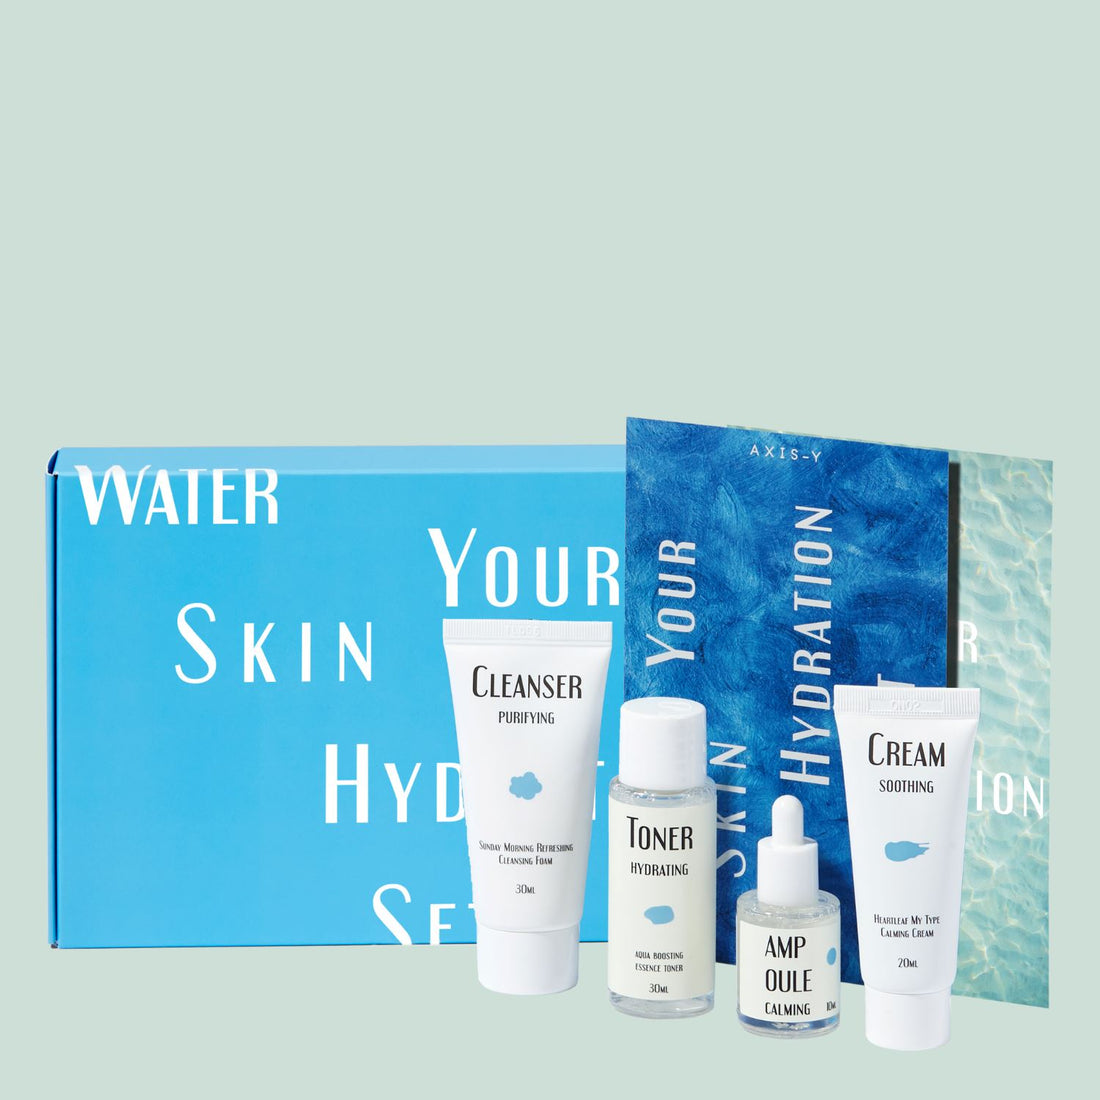 AXIS-Y Water Your Skin Ultra Hydration Set Skin Care AXIS-Y ORION XO Sri Lanka